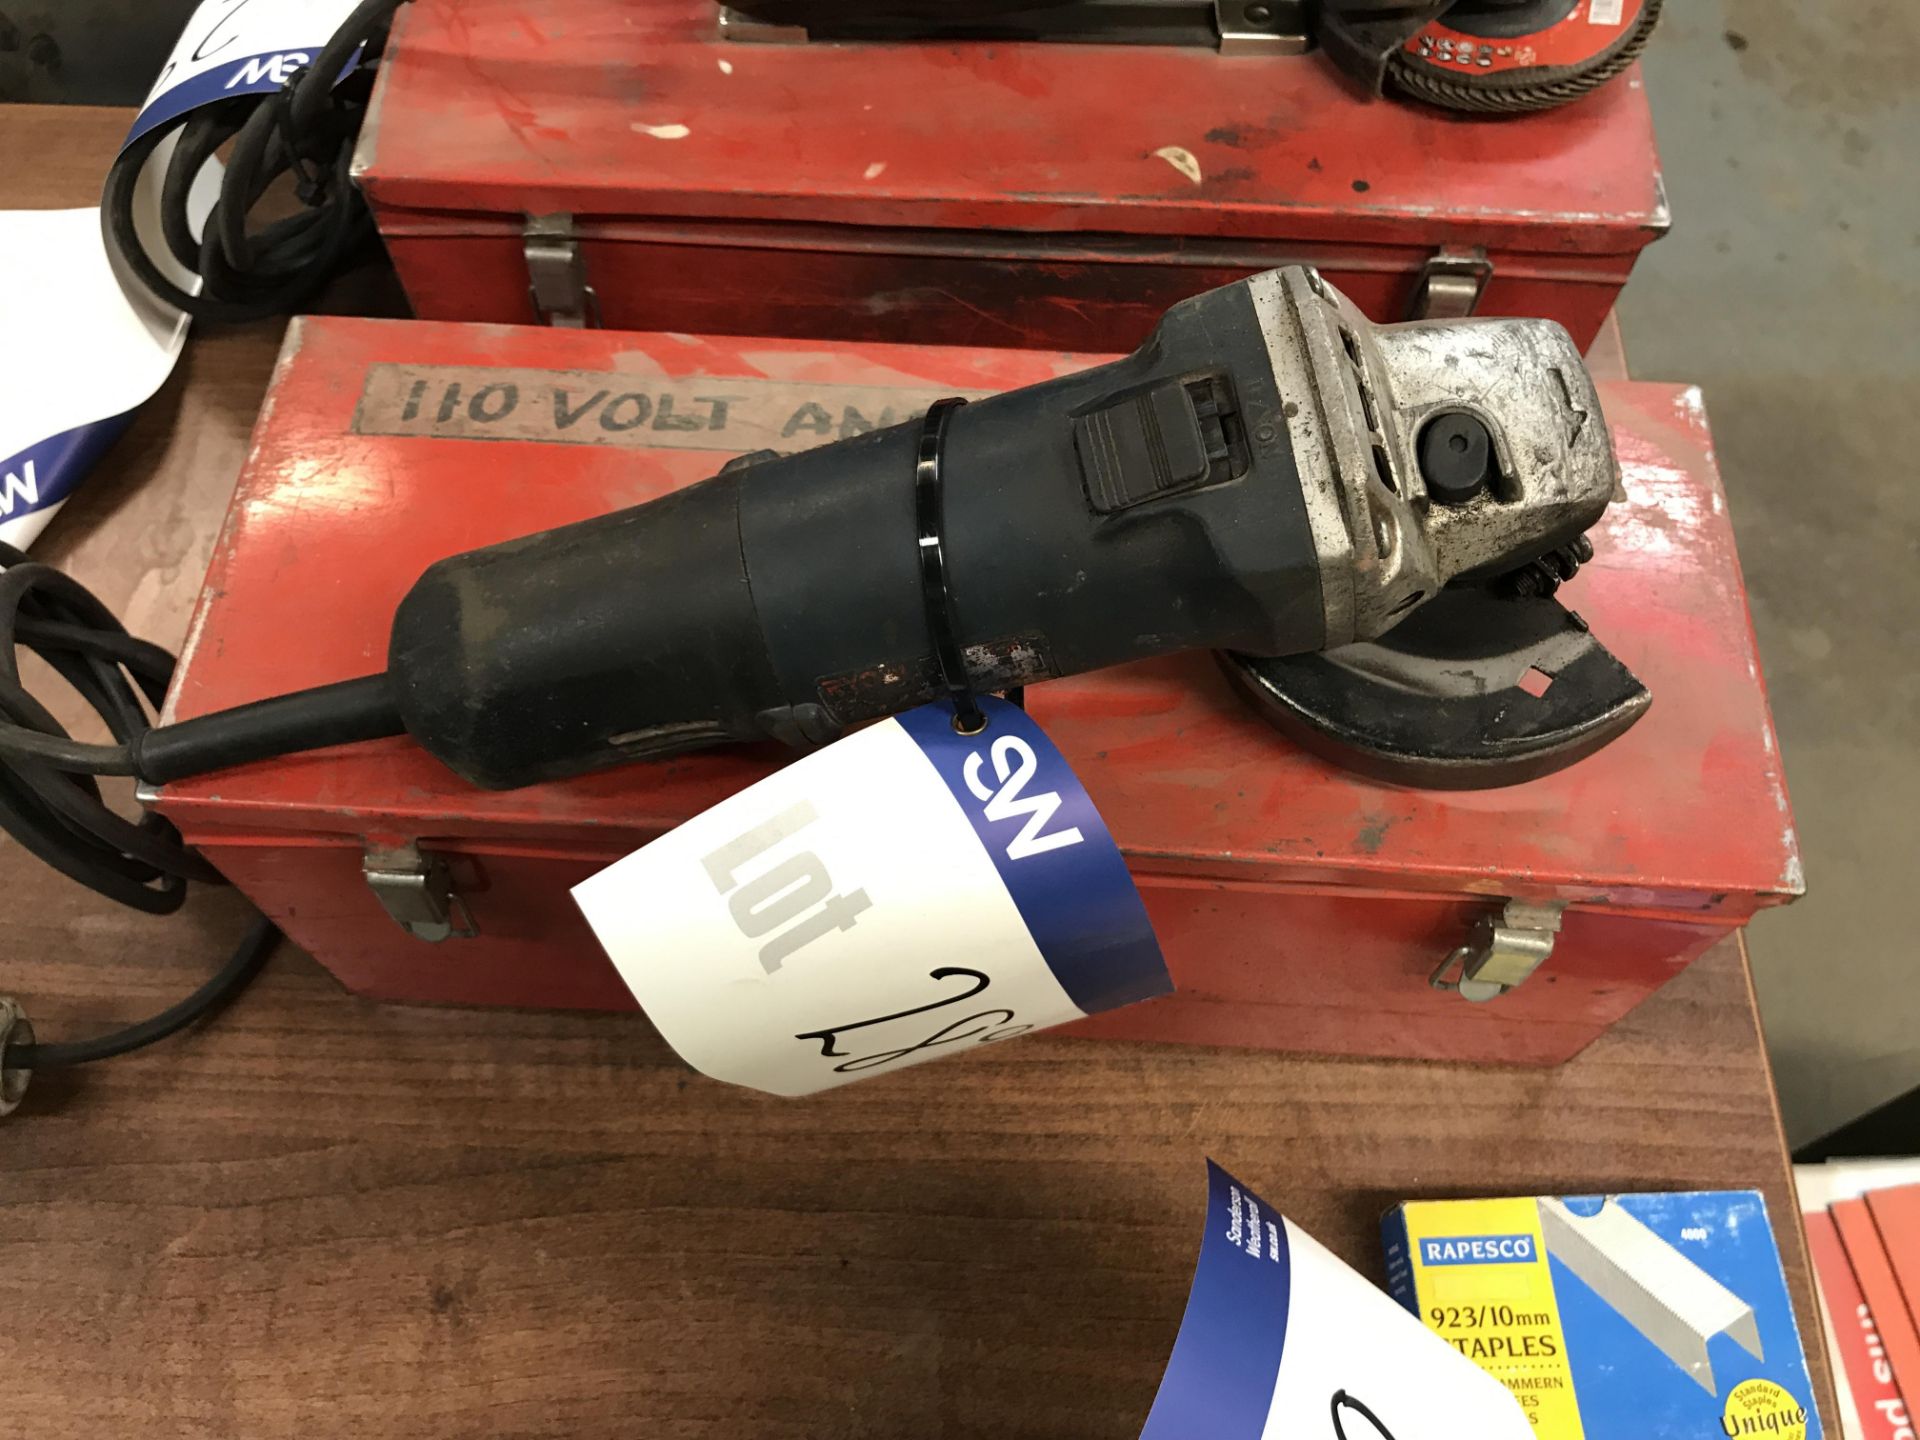 Ryobi Angle Grinder, 110V, with carry case (lot located at Bedfords Limited (In Administration),